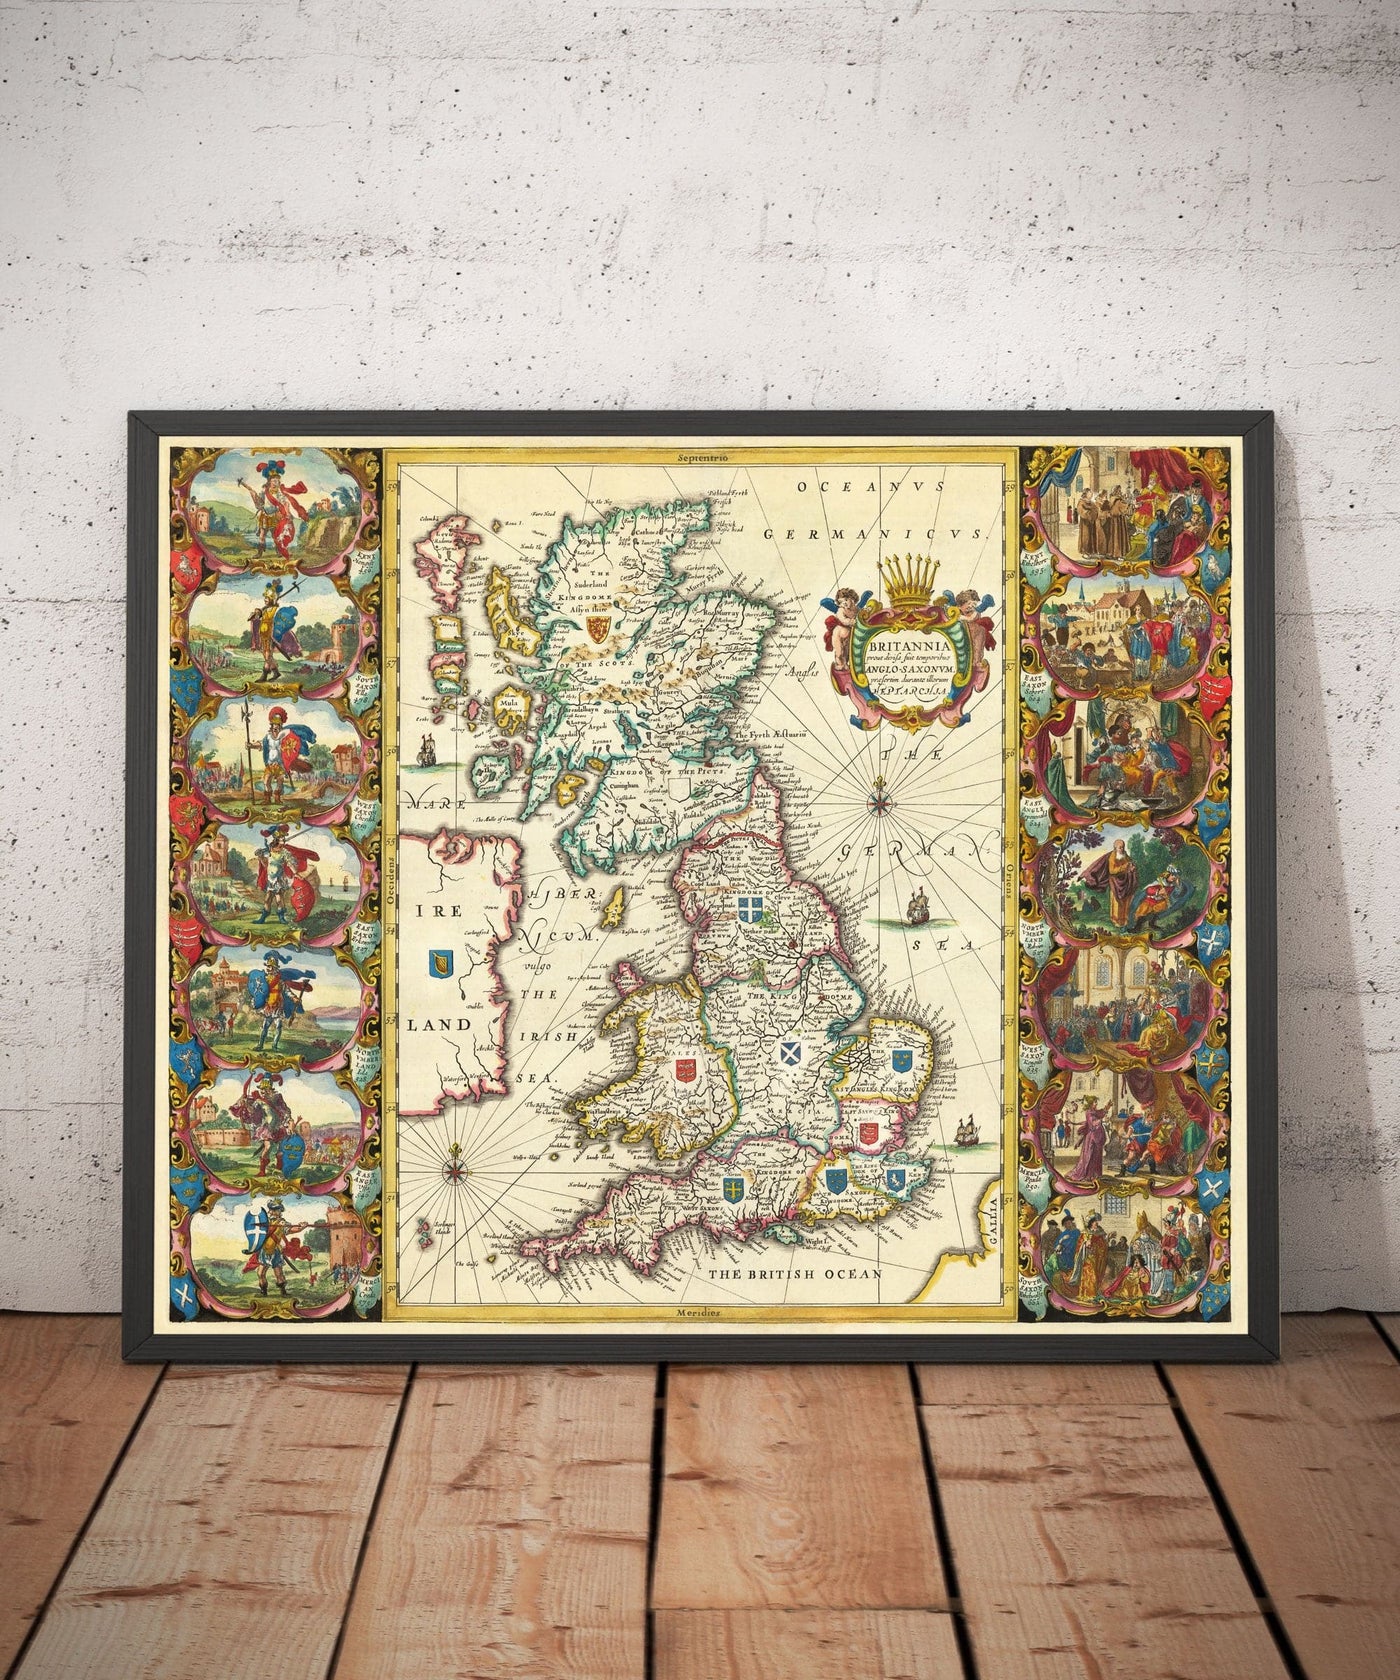 Old Viking Map of Great Britain in 1645 by Jan Jansson - Anglo-Saxon H ...